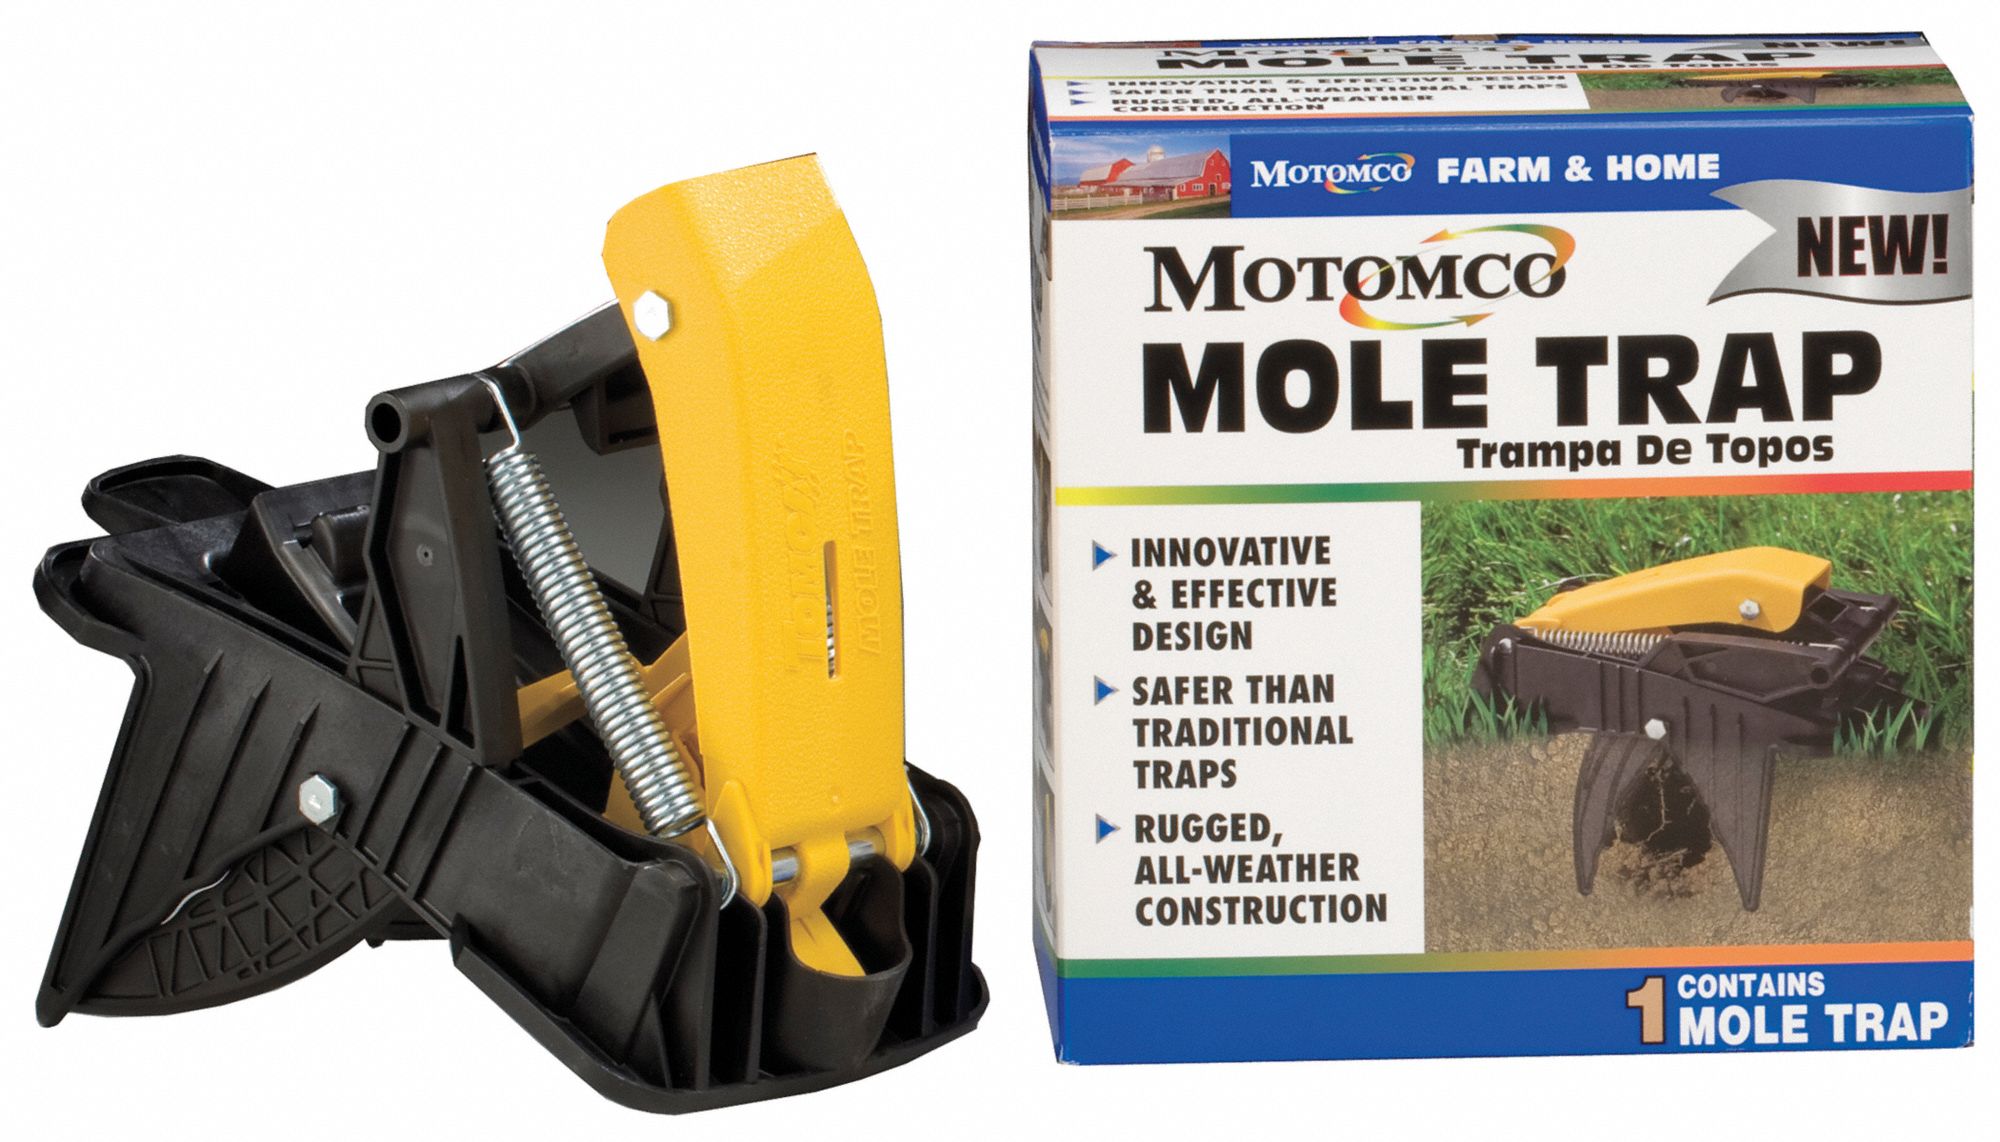 Is there a warranty on the Talpirid Mole Traps?